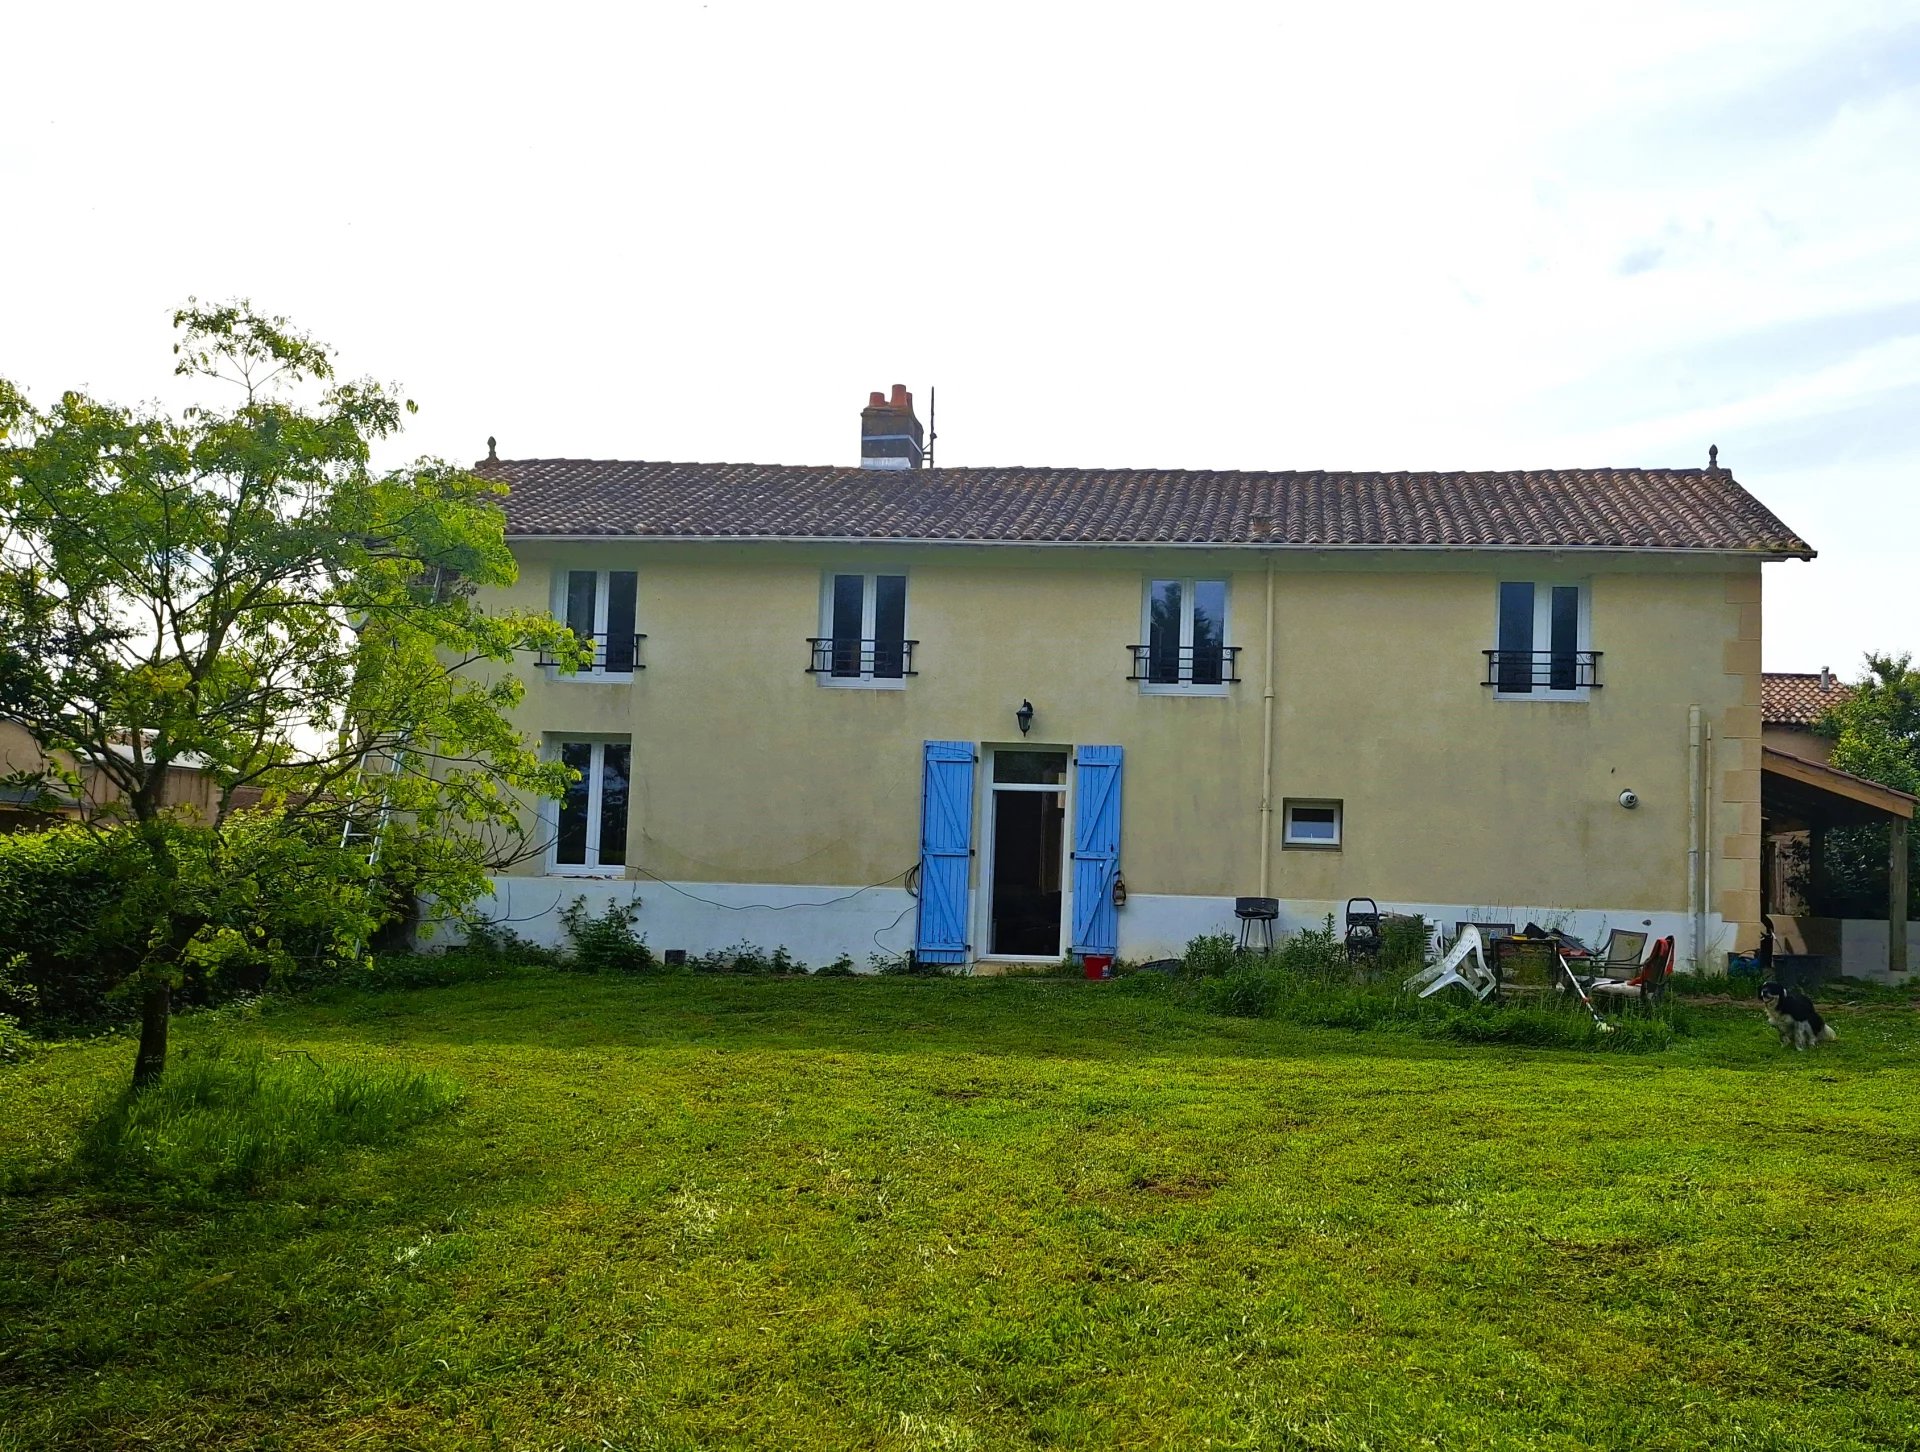 Farmhouse, outbuildings and 4000m² of land near popular village